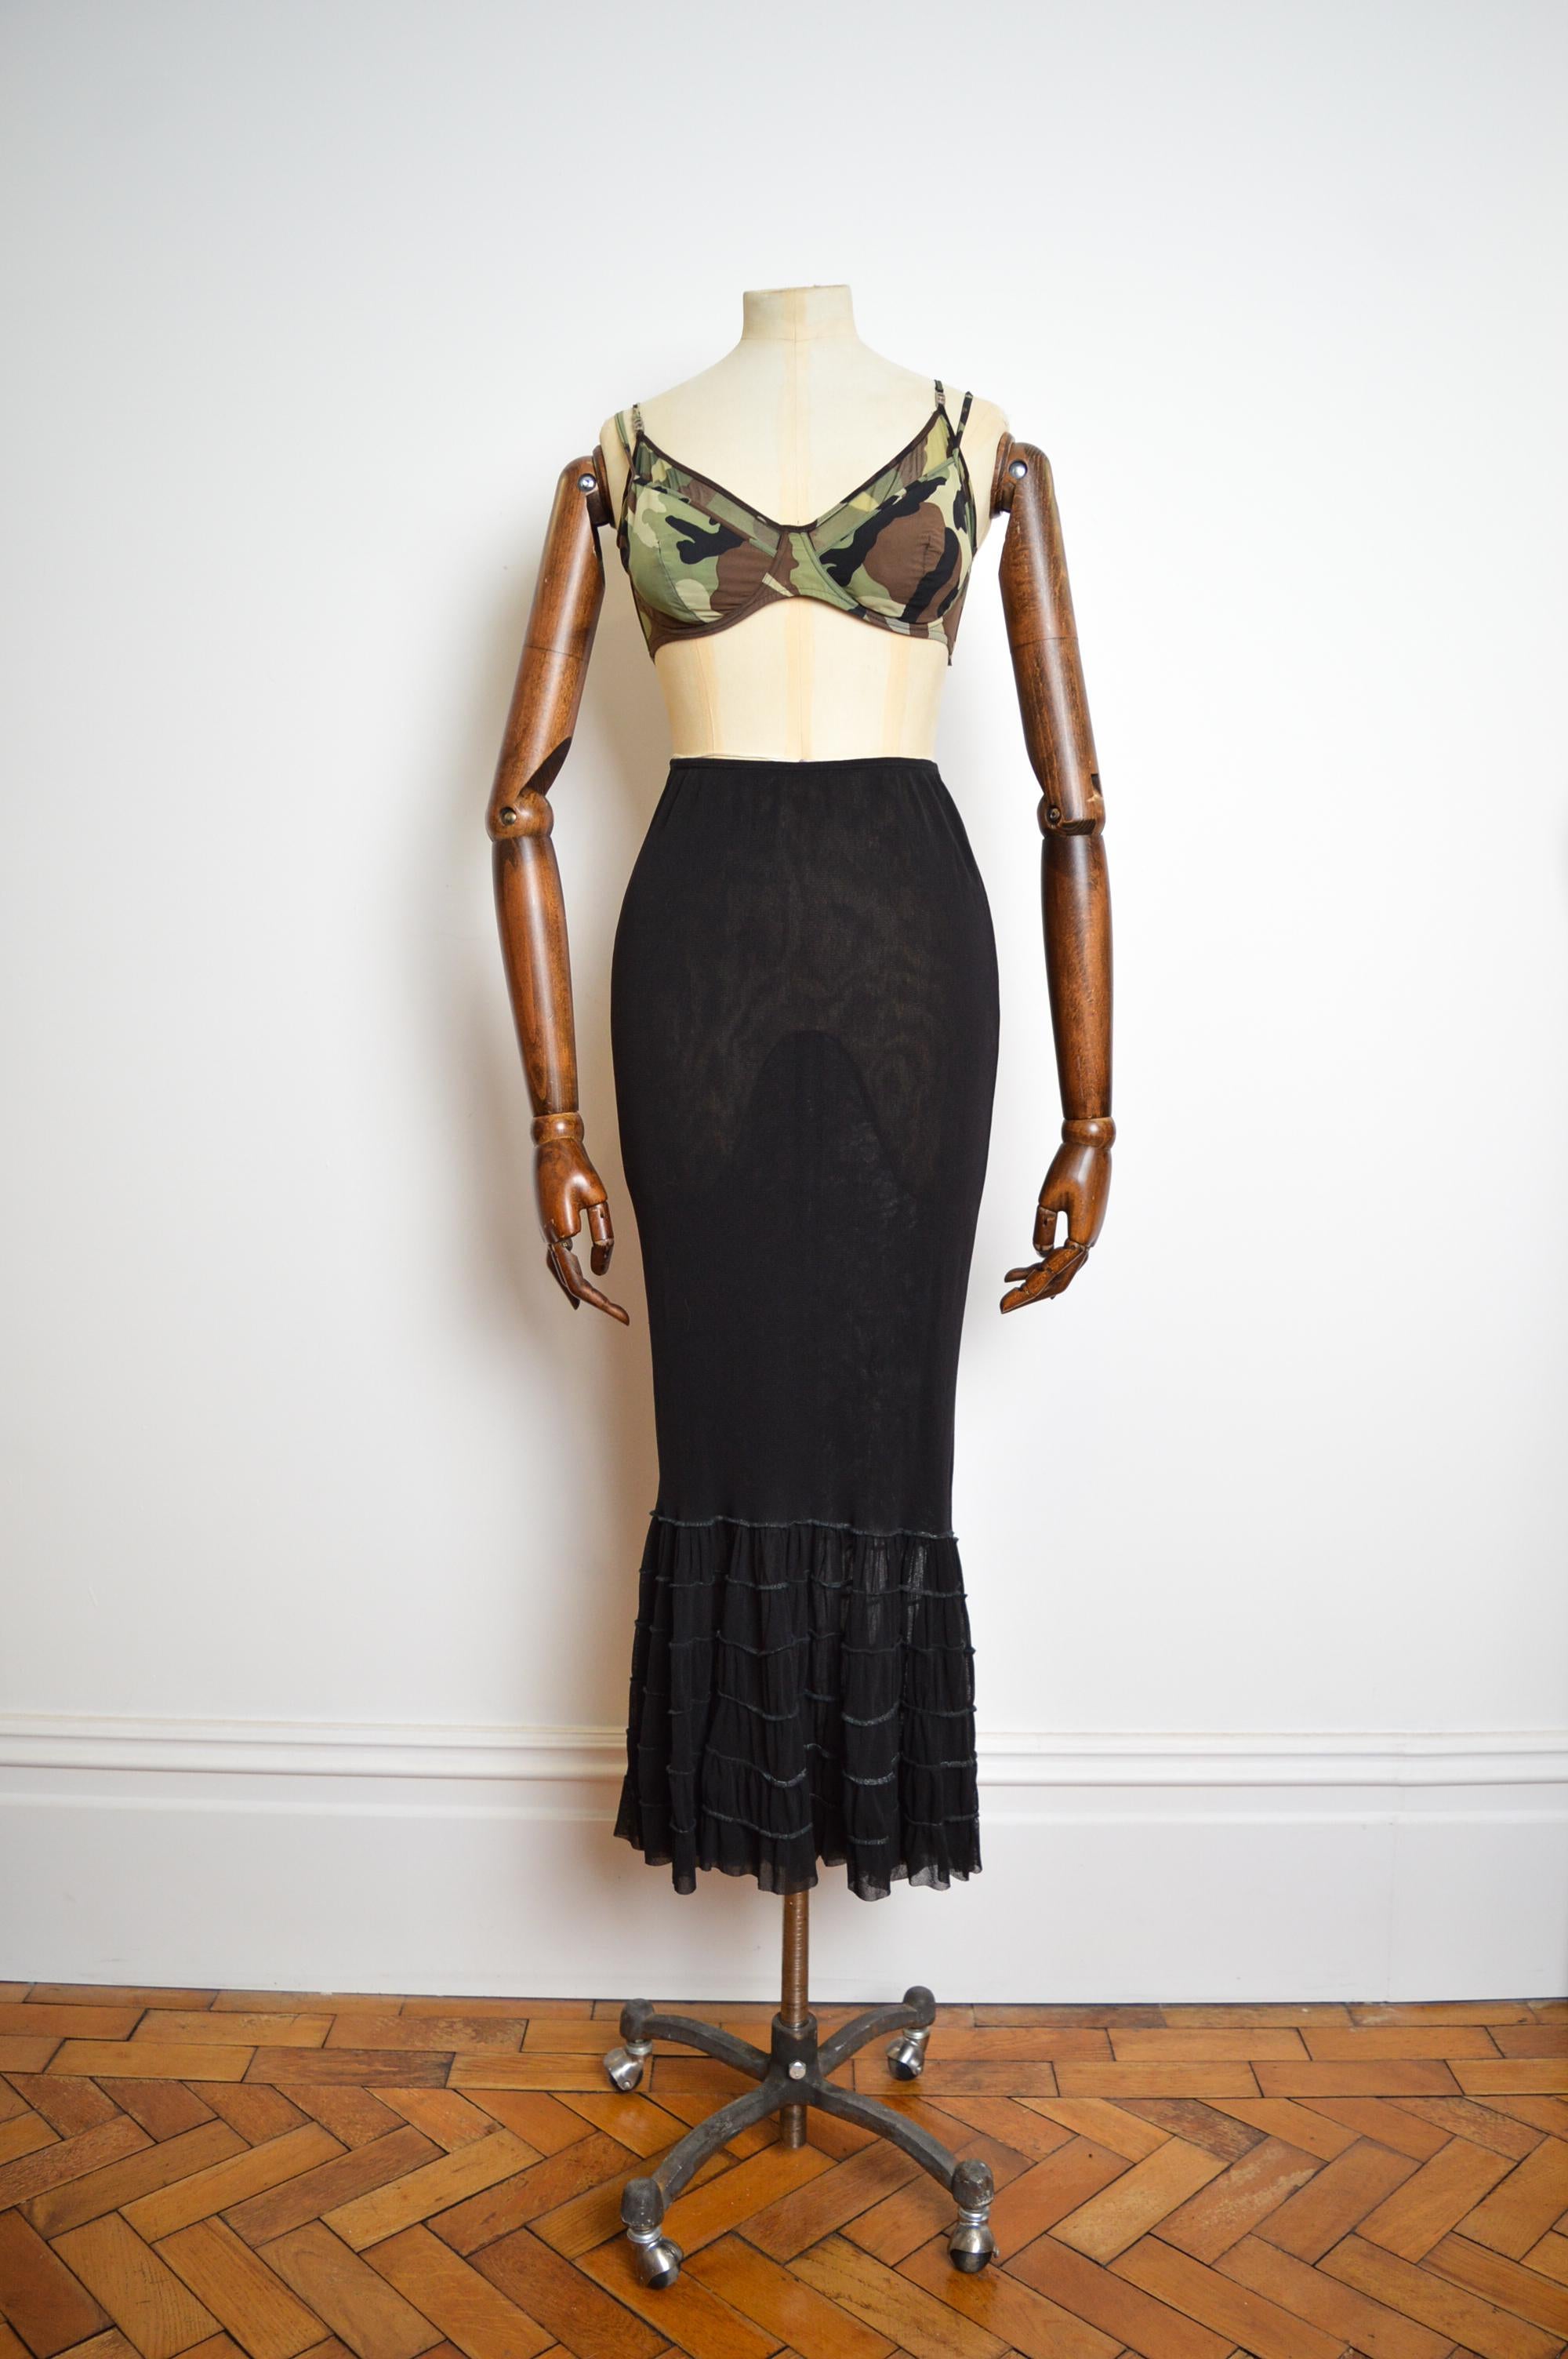 Beautiful 1990's Jean Paul Gaultier Mesh Maxi skirt constructed from a Super stretchy sheer black material with fish tail frilled hem for a little Drama !

MADE IN ITALY !

Features : High waisted with elasticated waist band, signature Gaultier loop